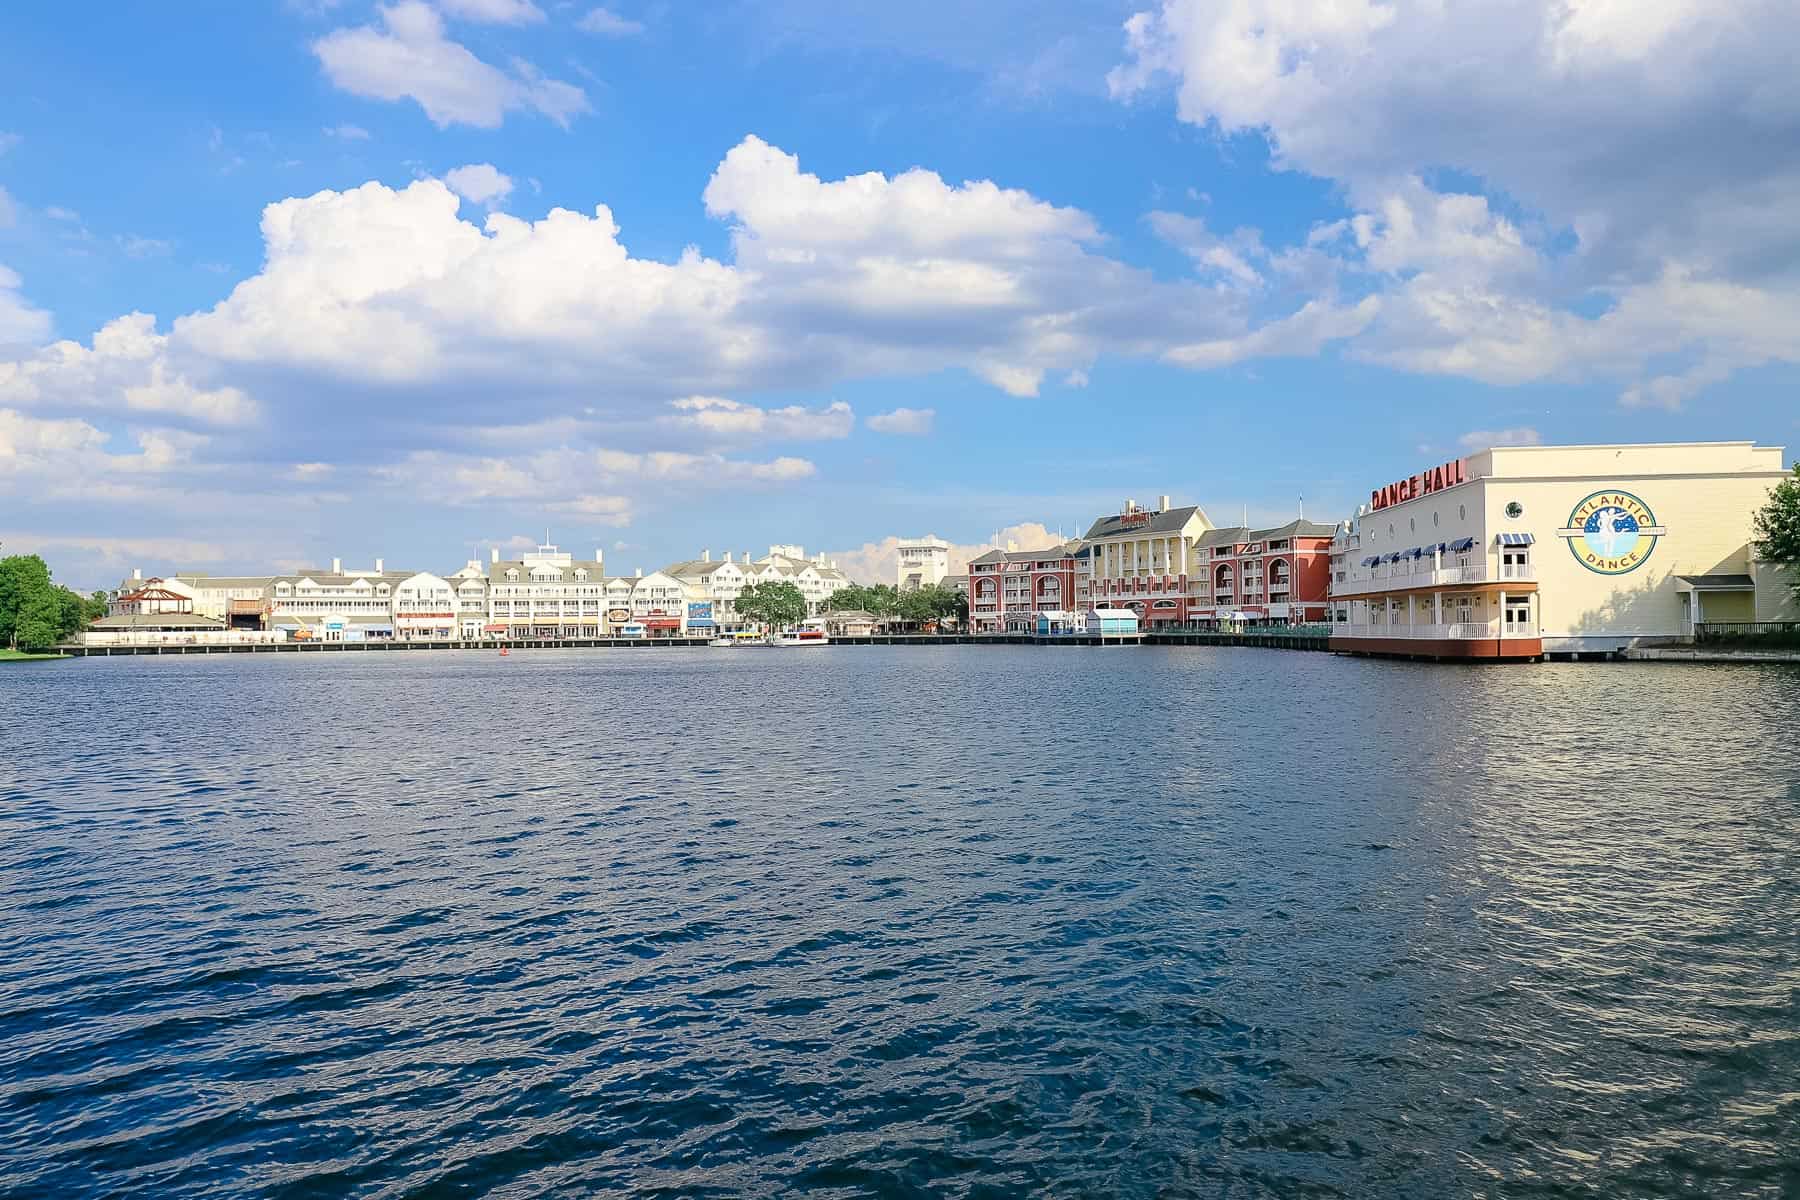 Disney's Boardwalk in the background of Crescent Lake